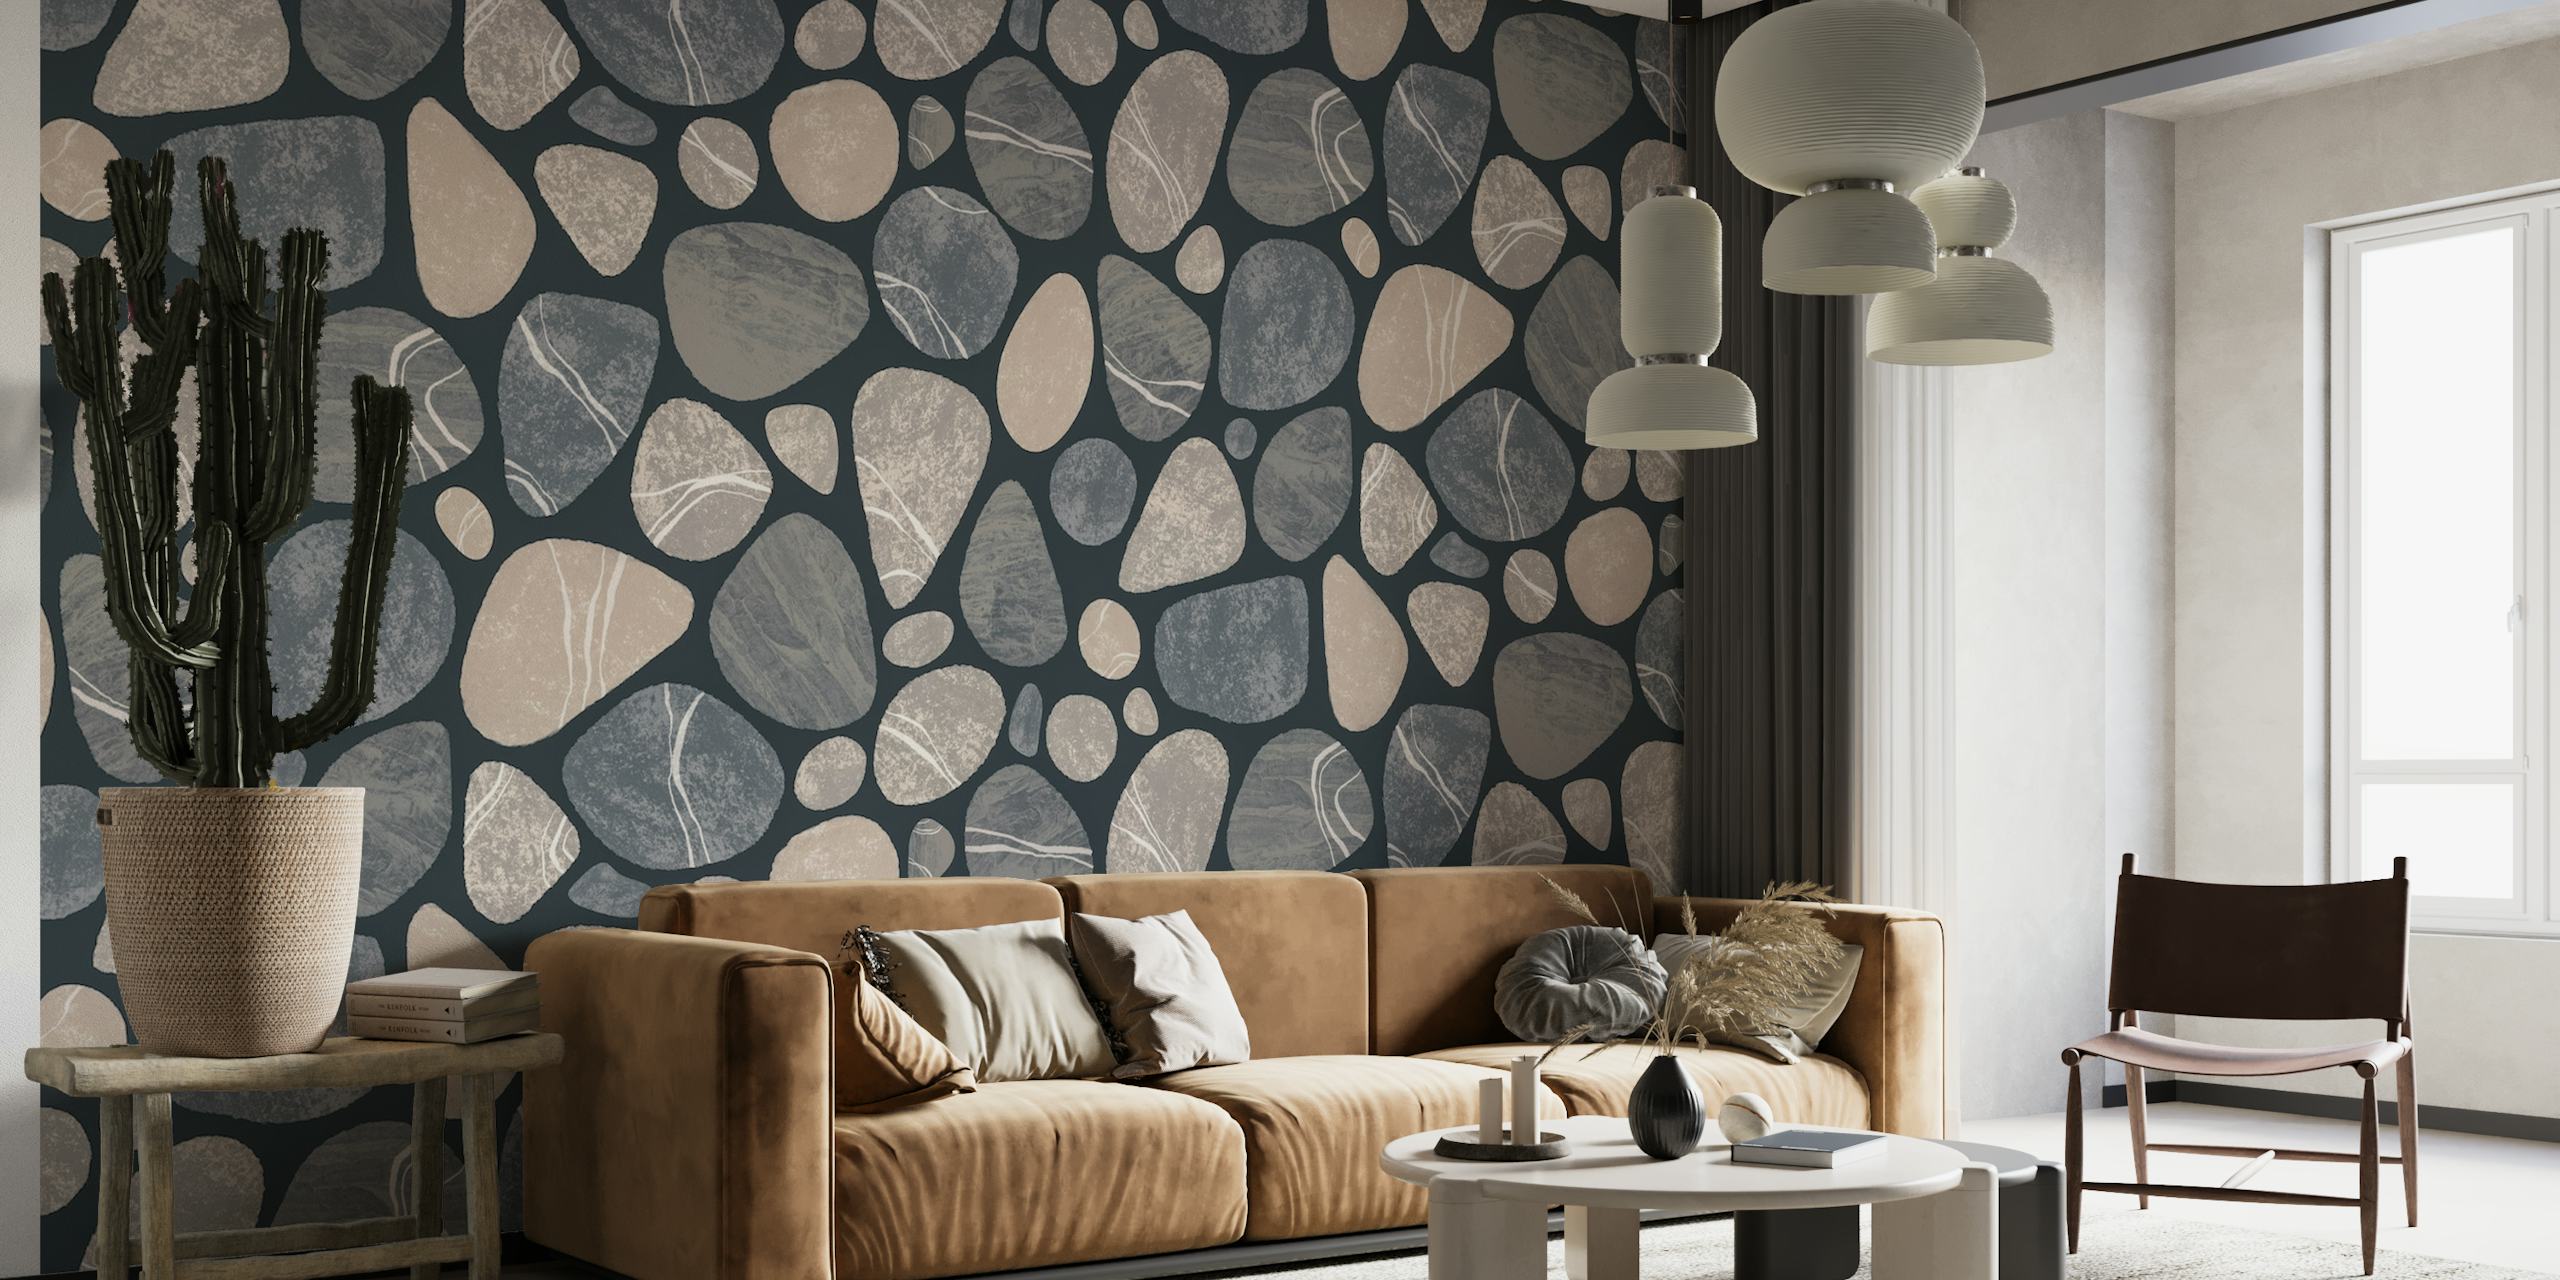 Beige and grey pebble stone pattern wall mural for a nature-inspired interior decor.